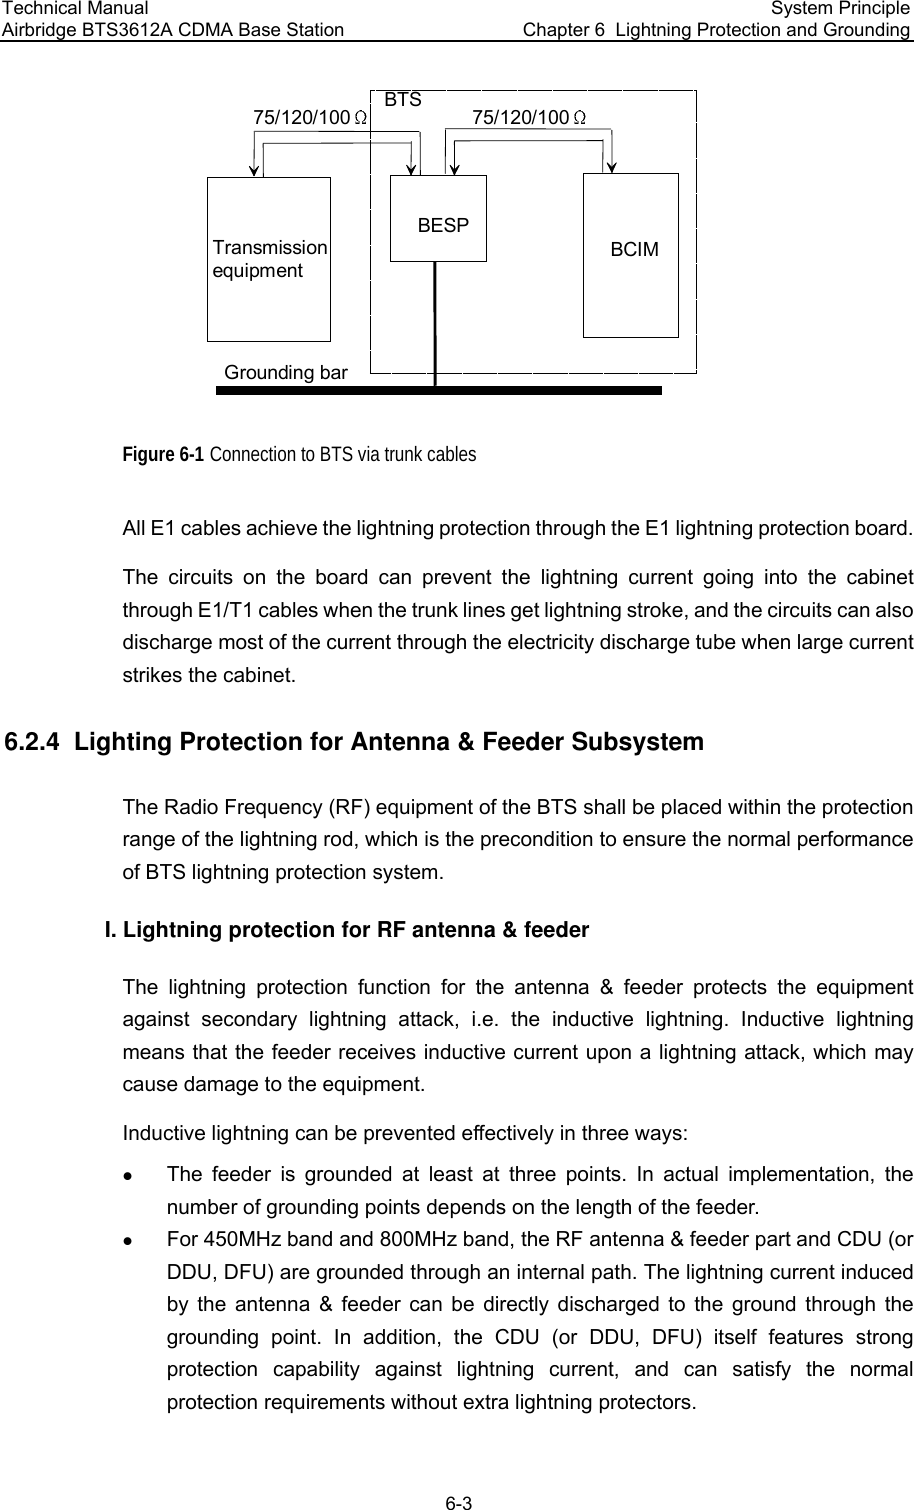 Technical Manual  Airbridge BTS3612A CDMA Base Station System Principle Chapter 6  Lightning Protection and Grounding  6-3 BESPBTSTransmissionequipmentBCIM75/120/100Grounding bar75/120/100 Figure 6-1 Connection to BTS via trunk cables All E1 cables achieve the lightning protection through the E1 lightning protection board.   The circuits on the board can prevent the lightning current going into the cabinet through E1/T1 cables when the trunk lines get lightning stroke, and the circuits can also discharge most of the current through the electricity discharge tube when large current strikes the cabinet.  6.2.4  Lighting Protection for Antenna &amp; Feeder Subsystem  The Radio Frequency (RF) equipment of the BTS shall be placed within the protection range of the lightning rod, which is the precondition to ensure the normal performance of BTS lightning protection system. I. Lightning protection for RF antenna &amp; feeder The lightning protection function for the antenna &amp; feeder protects the equipment against secondary lightning attack, i.e. the inductive lightning. Inductive lightning means that the feeder receives inductive current upon a lightning attack, which may cause damage to the equipment.  Inductive lightning can be prevented effectively in three ways: z The feeder is grounded at least at three points. In actual implementation, the number of grounding points depends on the length of the feeder.  z For 450MHz band and 800MHz band, the RF antenna &amp; feeder part and CDU (or DDU, DFU) are grounded through an internal path. The lightning current induced by the antenna &amp; feeder can be directly discharged to the ground through the grounding point. In addition, the CDU (or DDU, DFU) itself features strong protection capability against lightning current, and can satisfy the normal protection requirements without extra lightning protectors.  